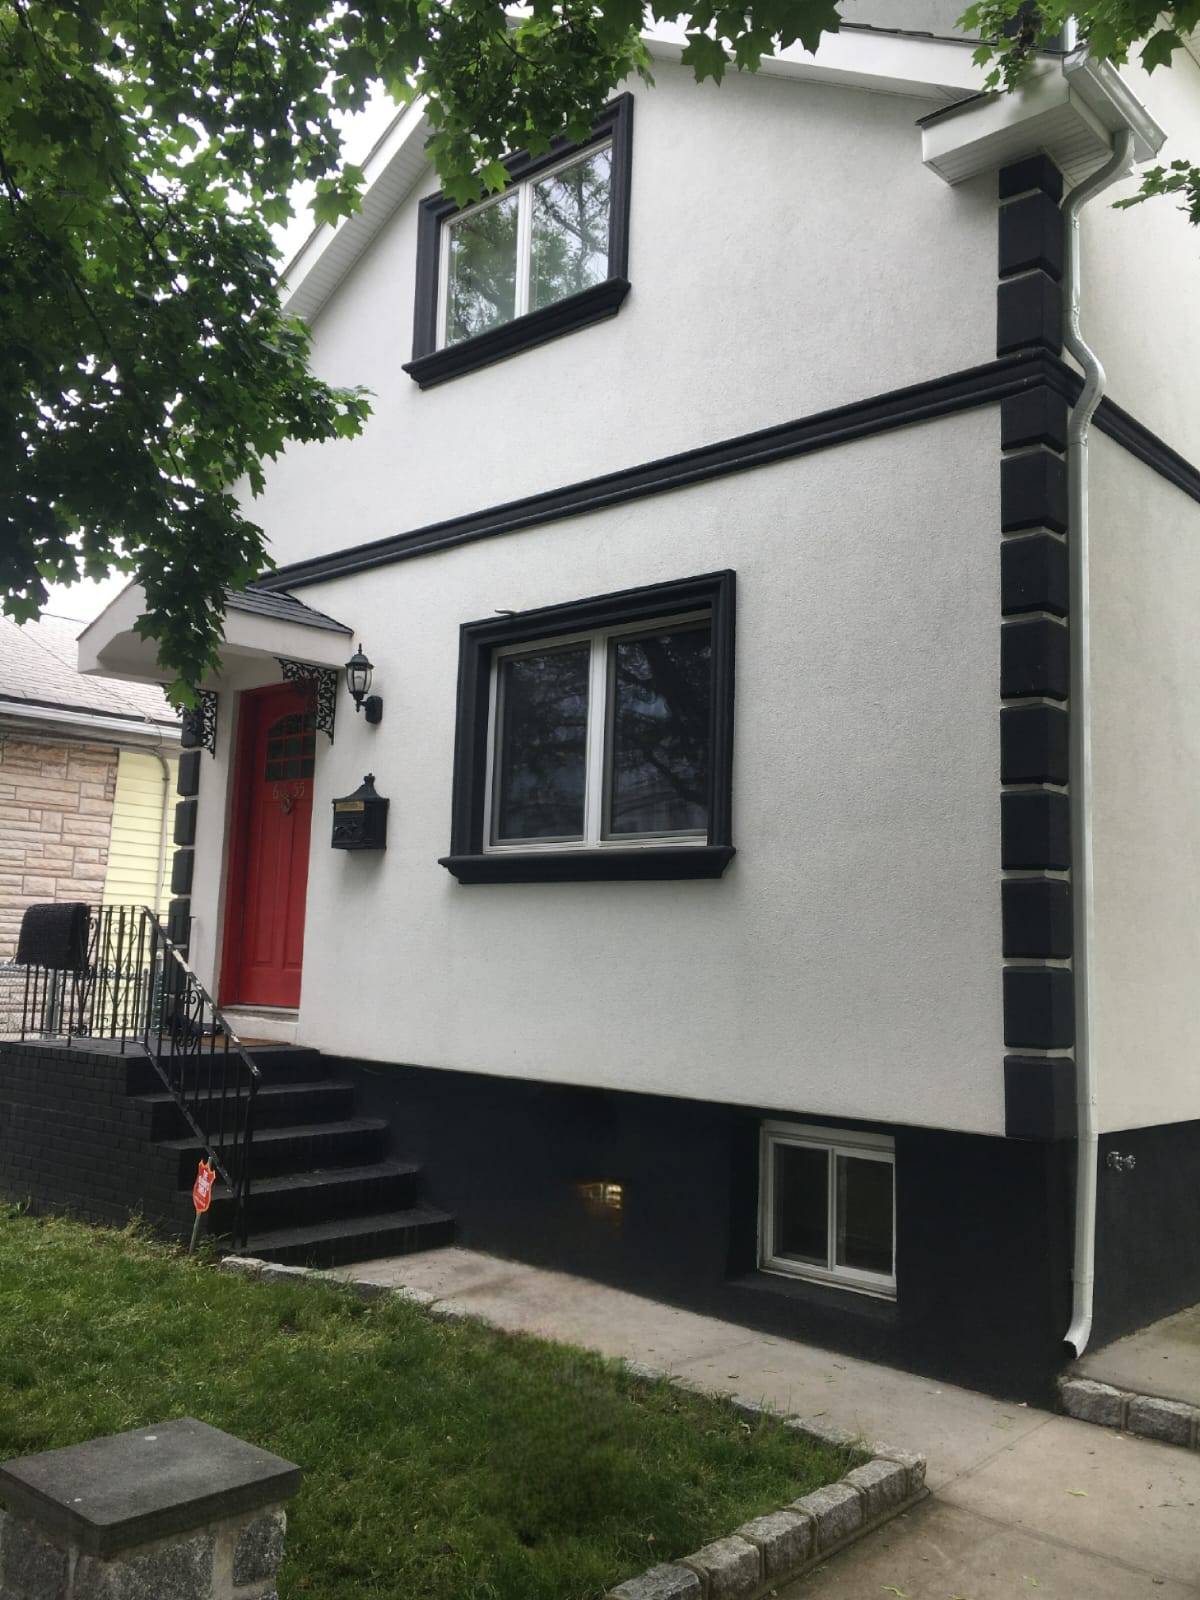 Welcome Home ! This 4 bedroom, 3 bathroom home on a 40x100 lot in Maspeth Queens is ready for you to move in.